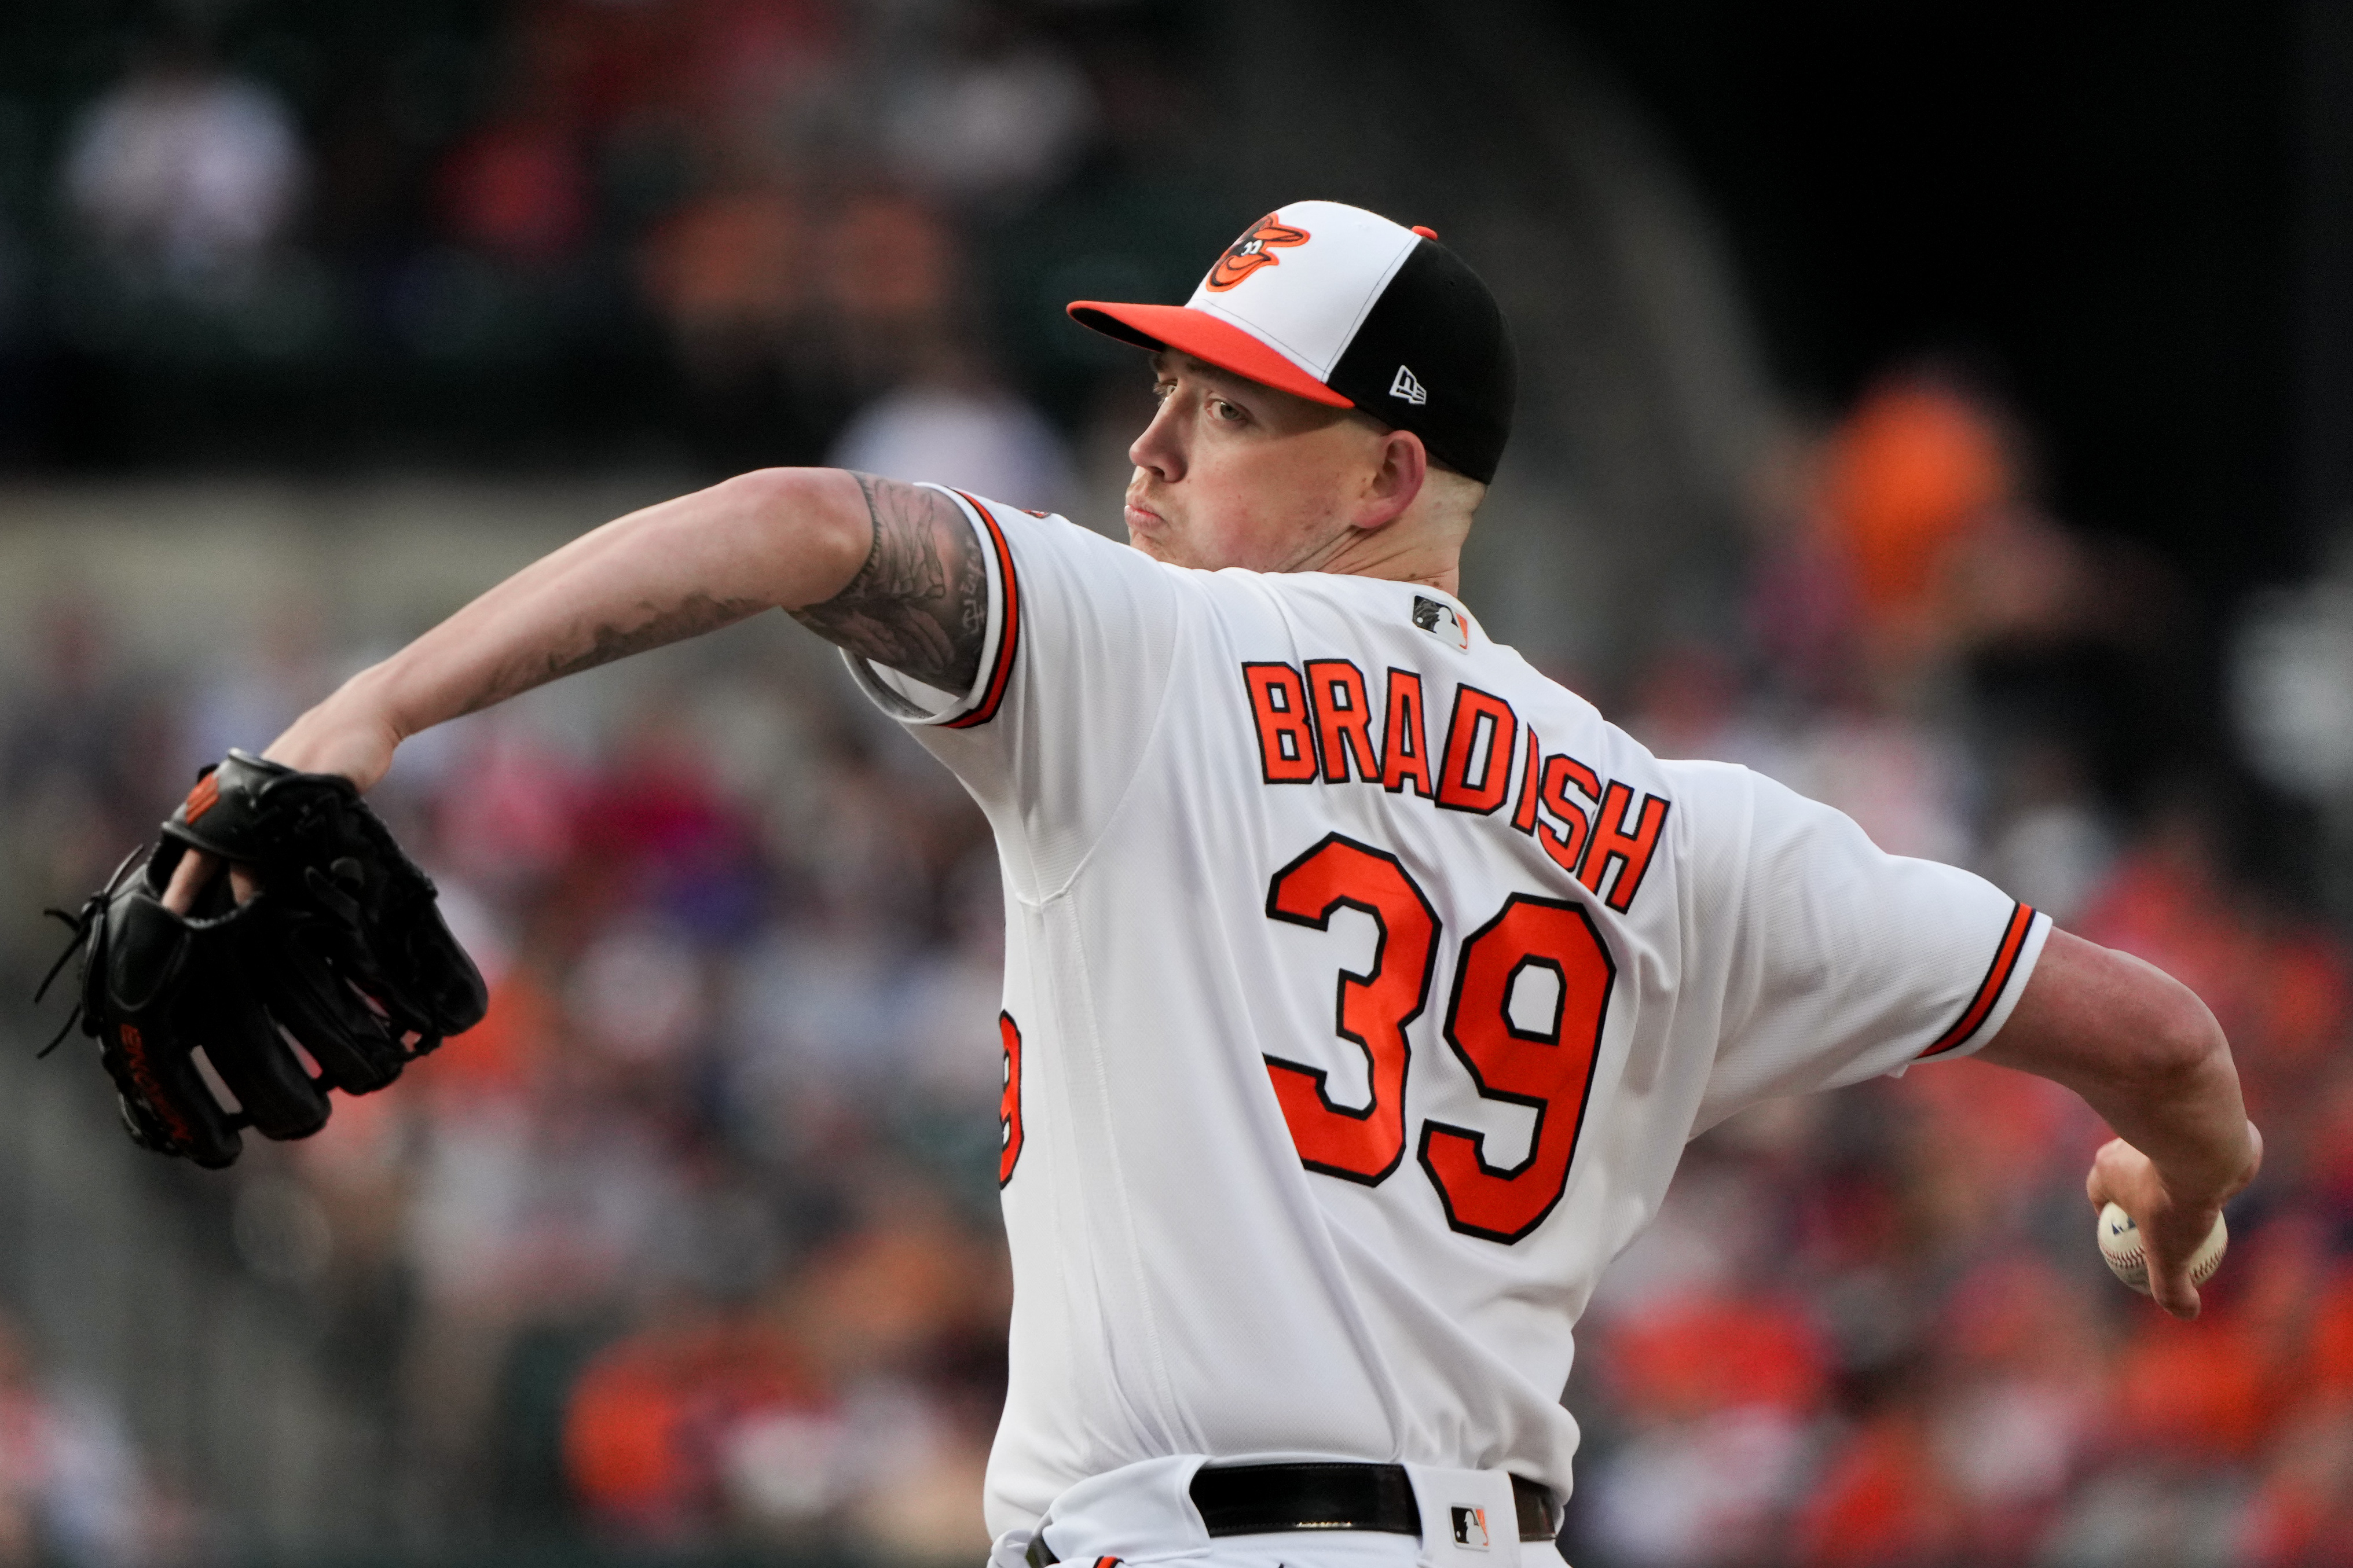 The Orioles Used To Be Bad, Ish; Now They Have Kyle Bradish